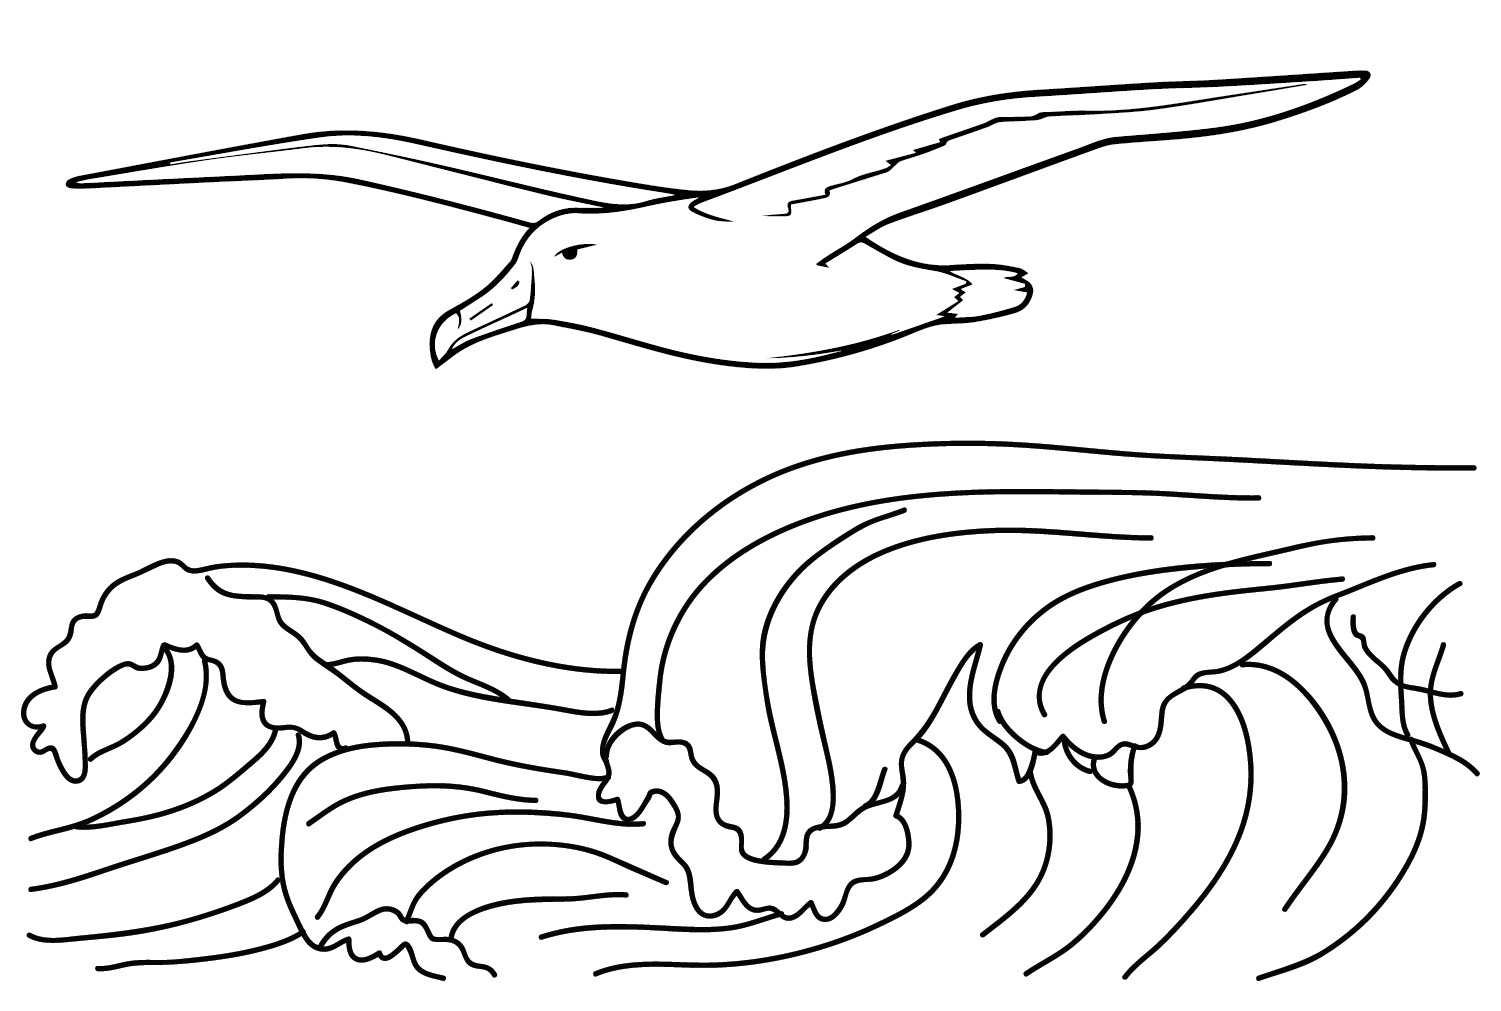 Albatross Coloring Page Printable from Albatross